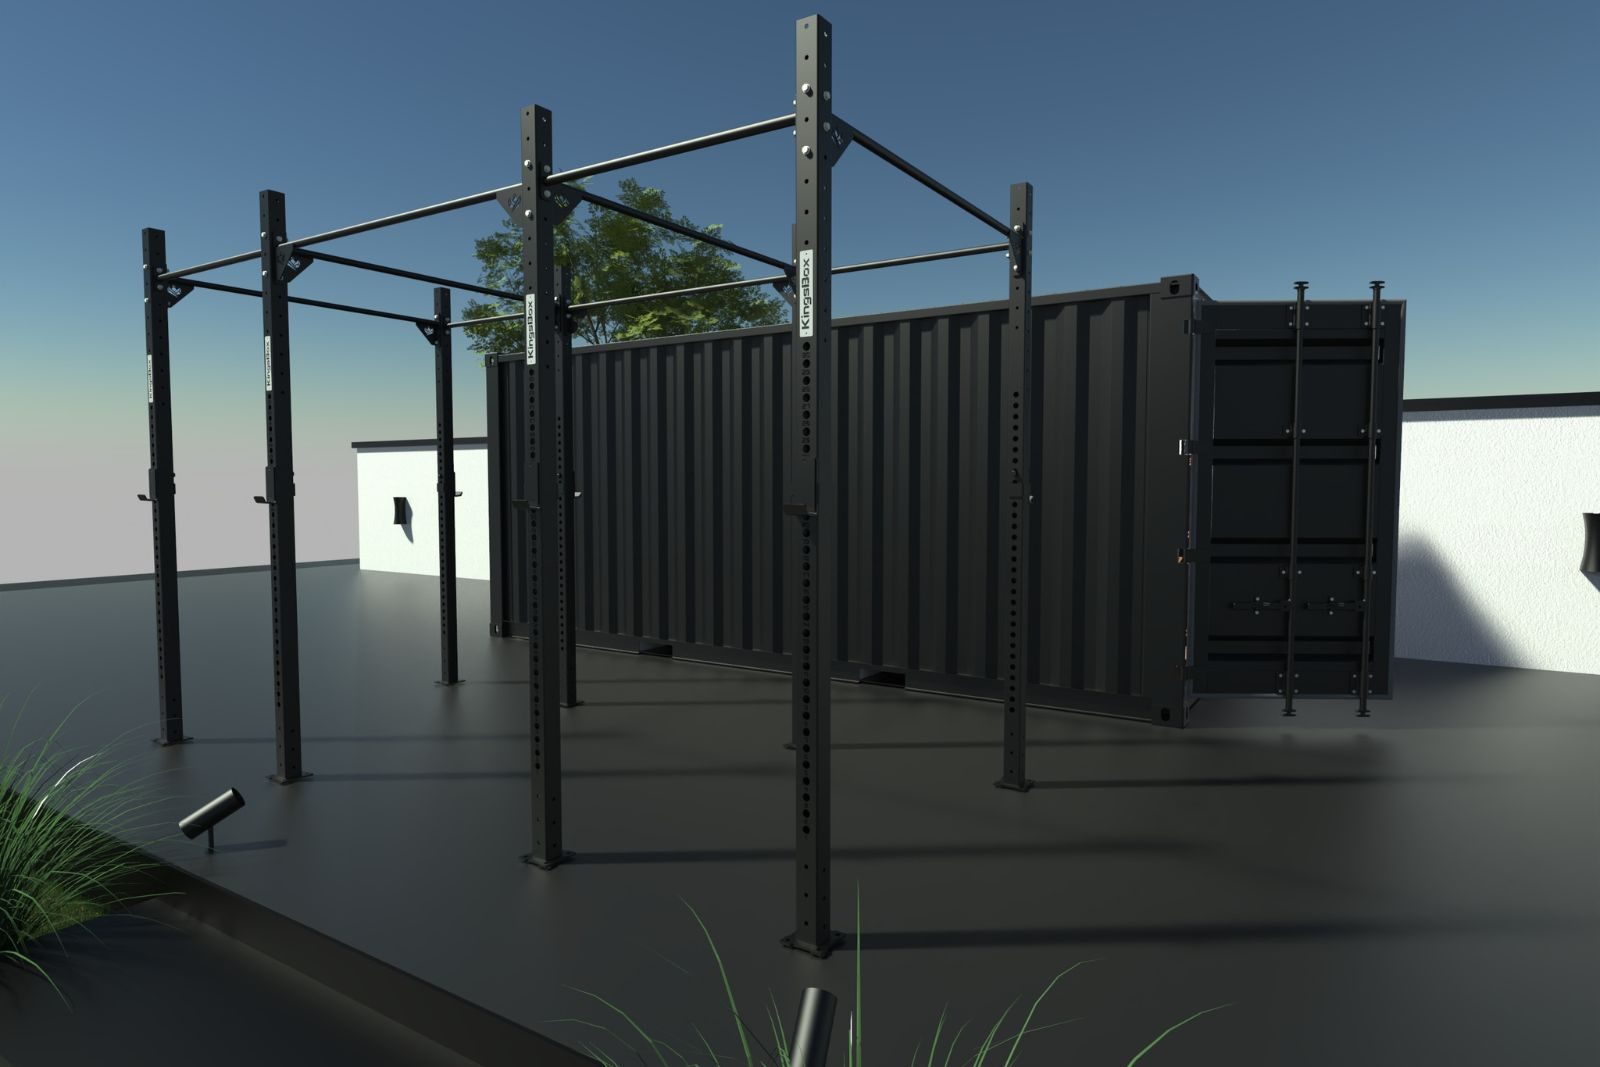 KingsBox Gym in Storage Container for 8 persons